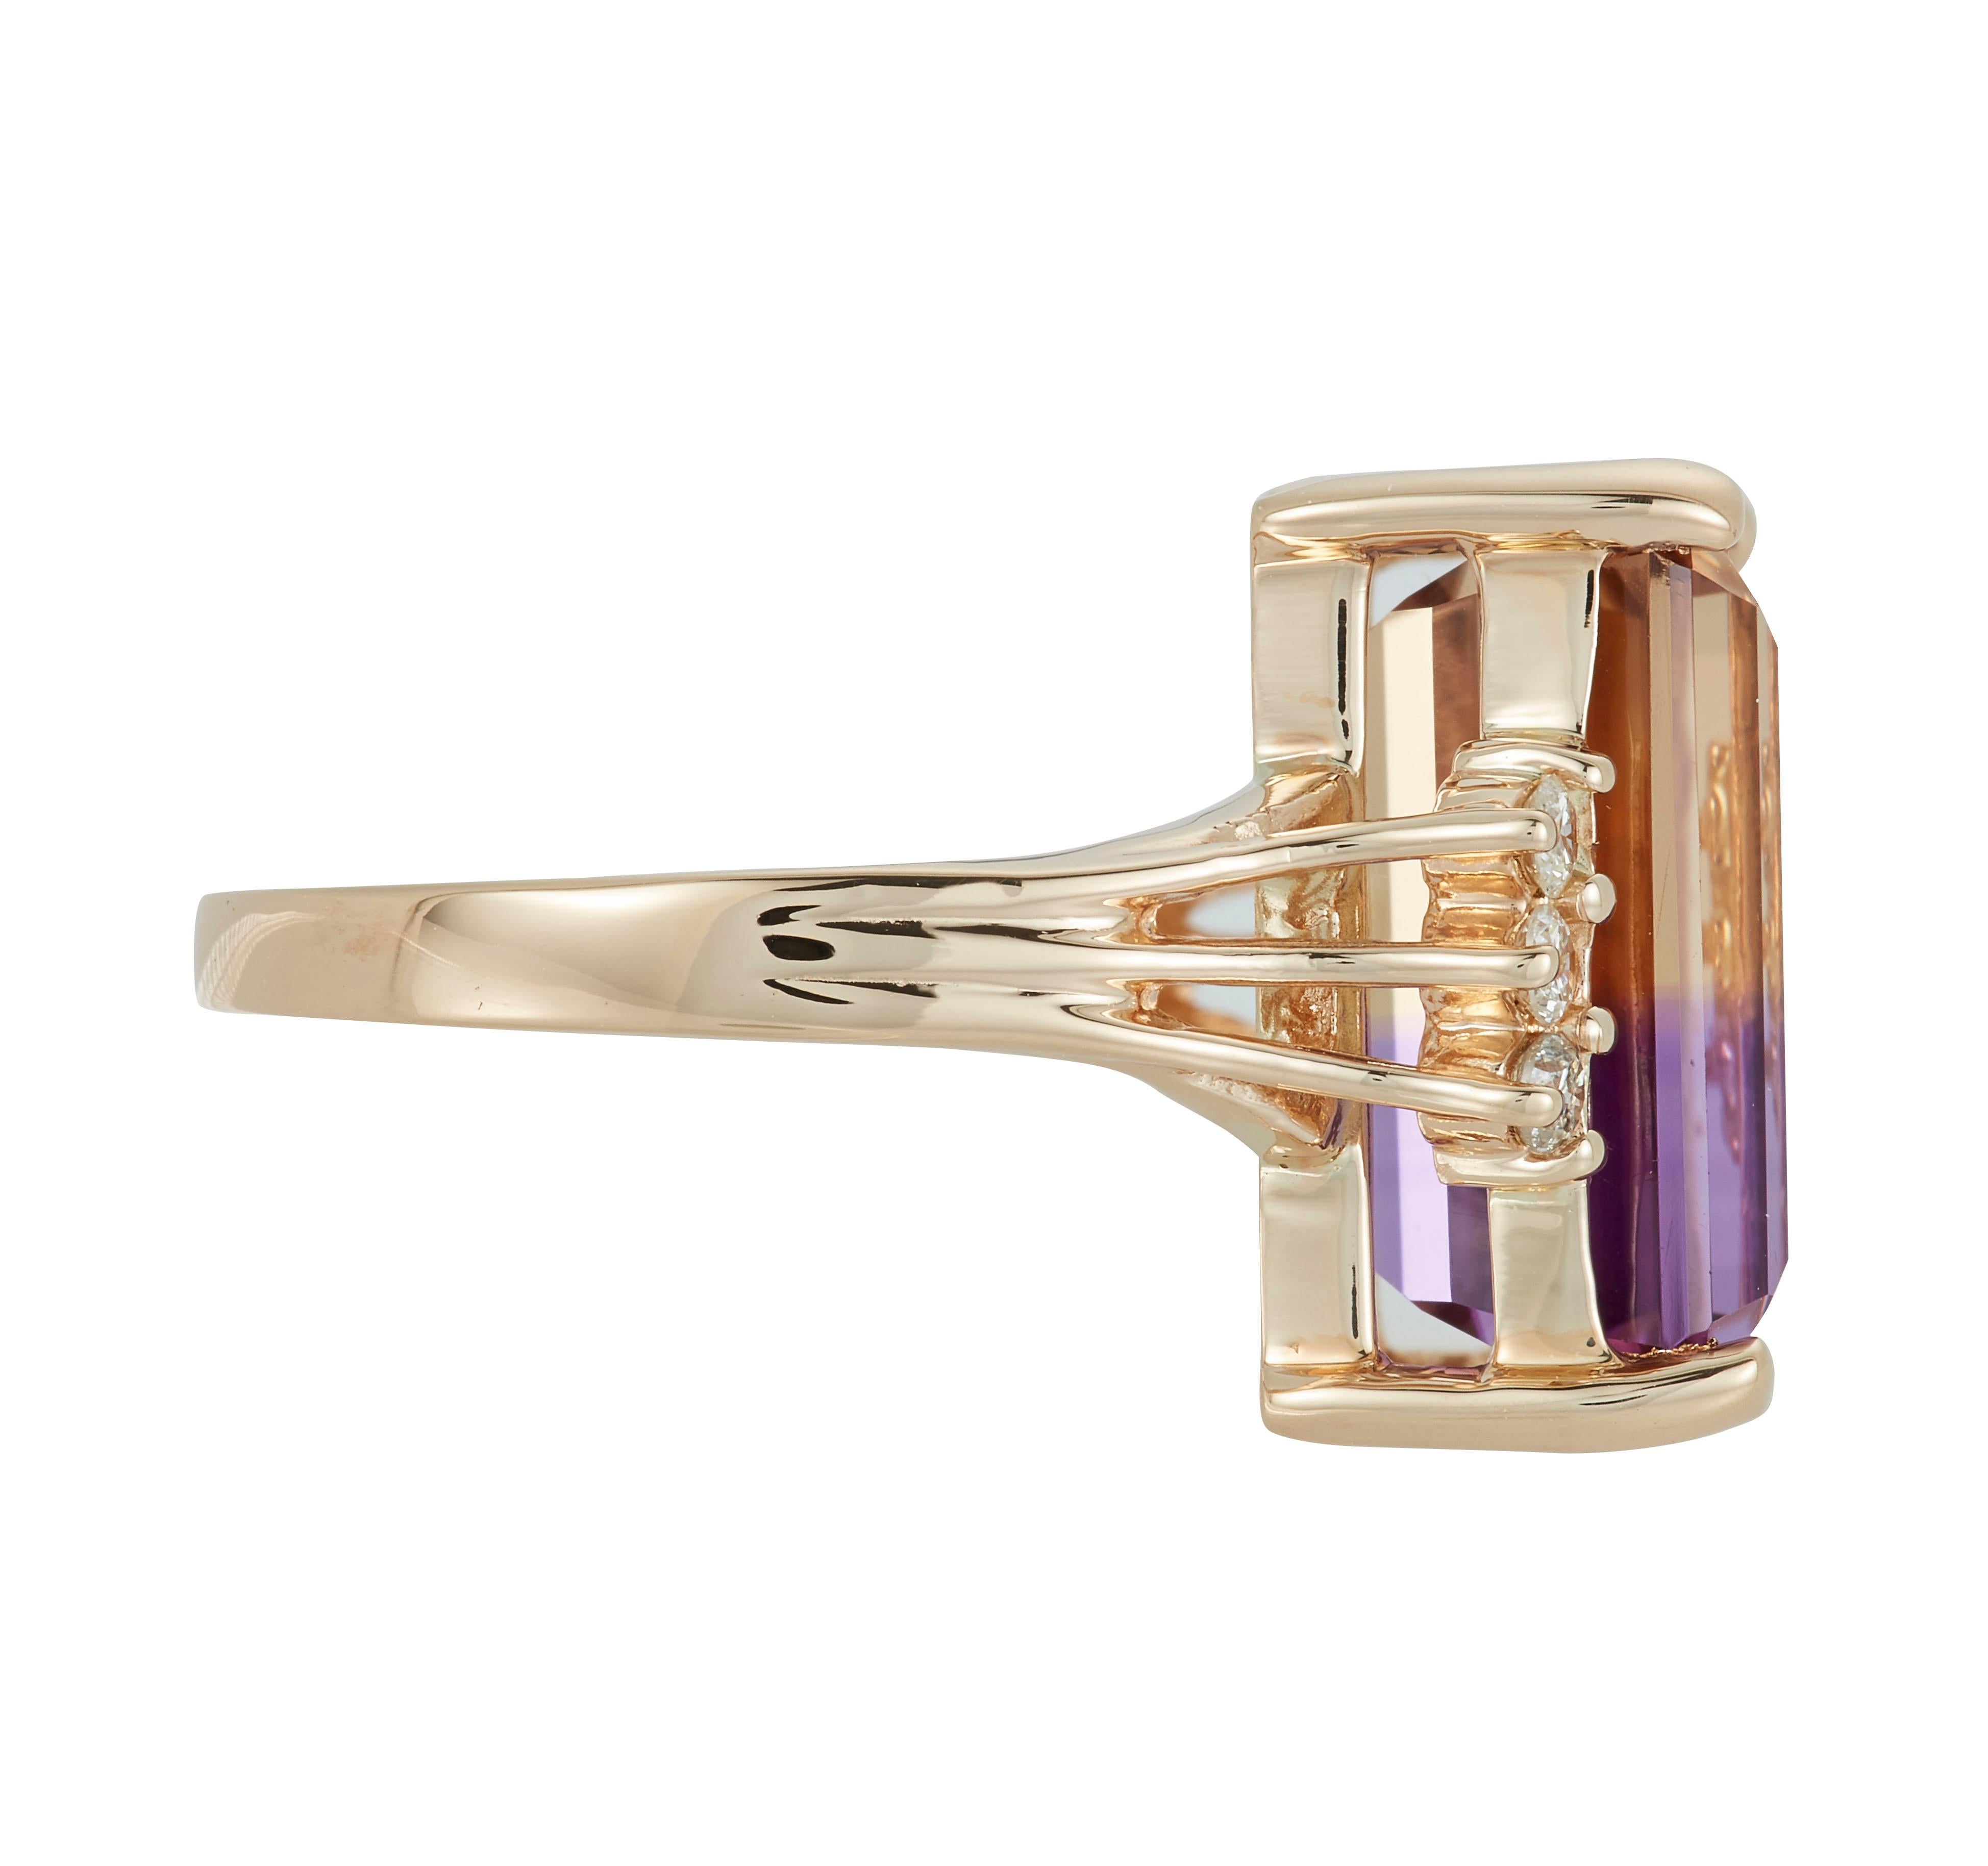 14K Yellow Gold
1 Emerald Cut Naturally Bicolor Ametrine at 10.00 Carats - Measuring 15 x 11
6 Brilliant Round White Diamonds at 0.21 Carats - Color: H-I /Clarity: SI

Alberto offers complimentary sizing on all rings.

Fine one-of-a-kind